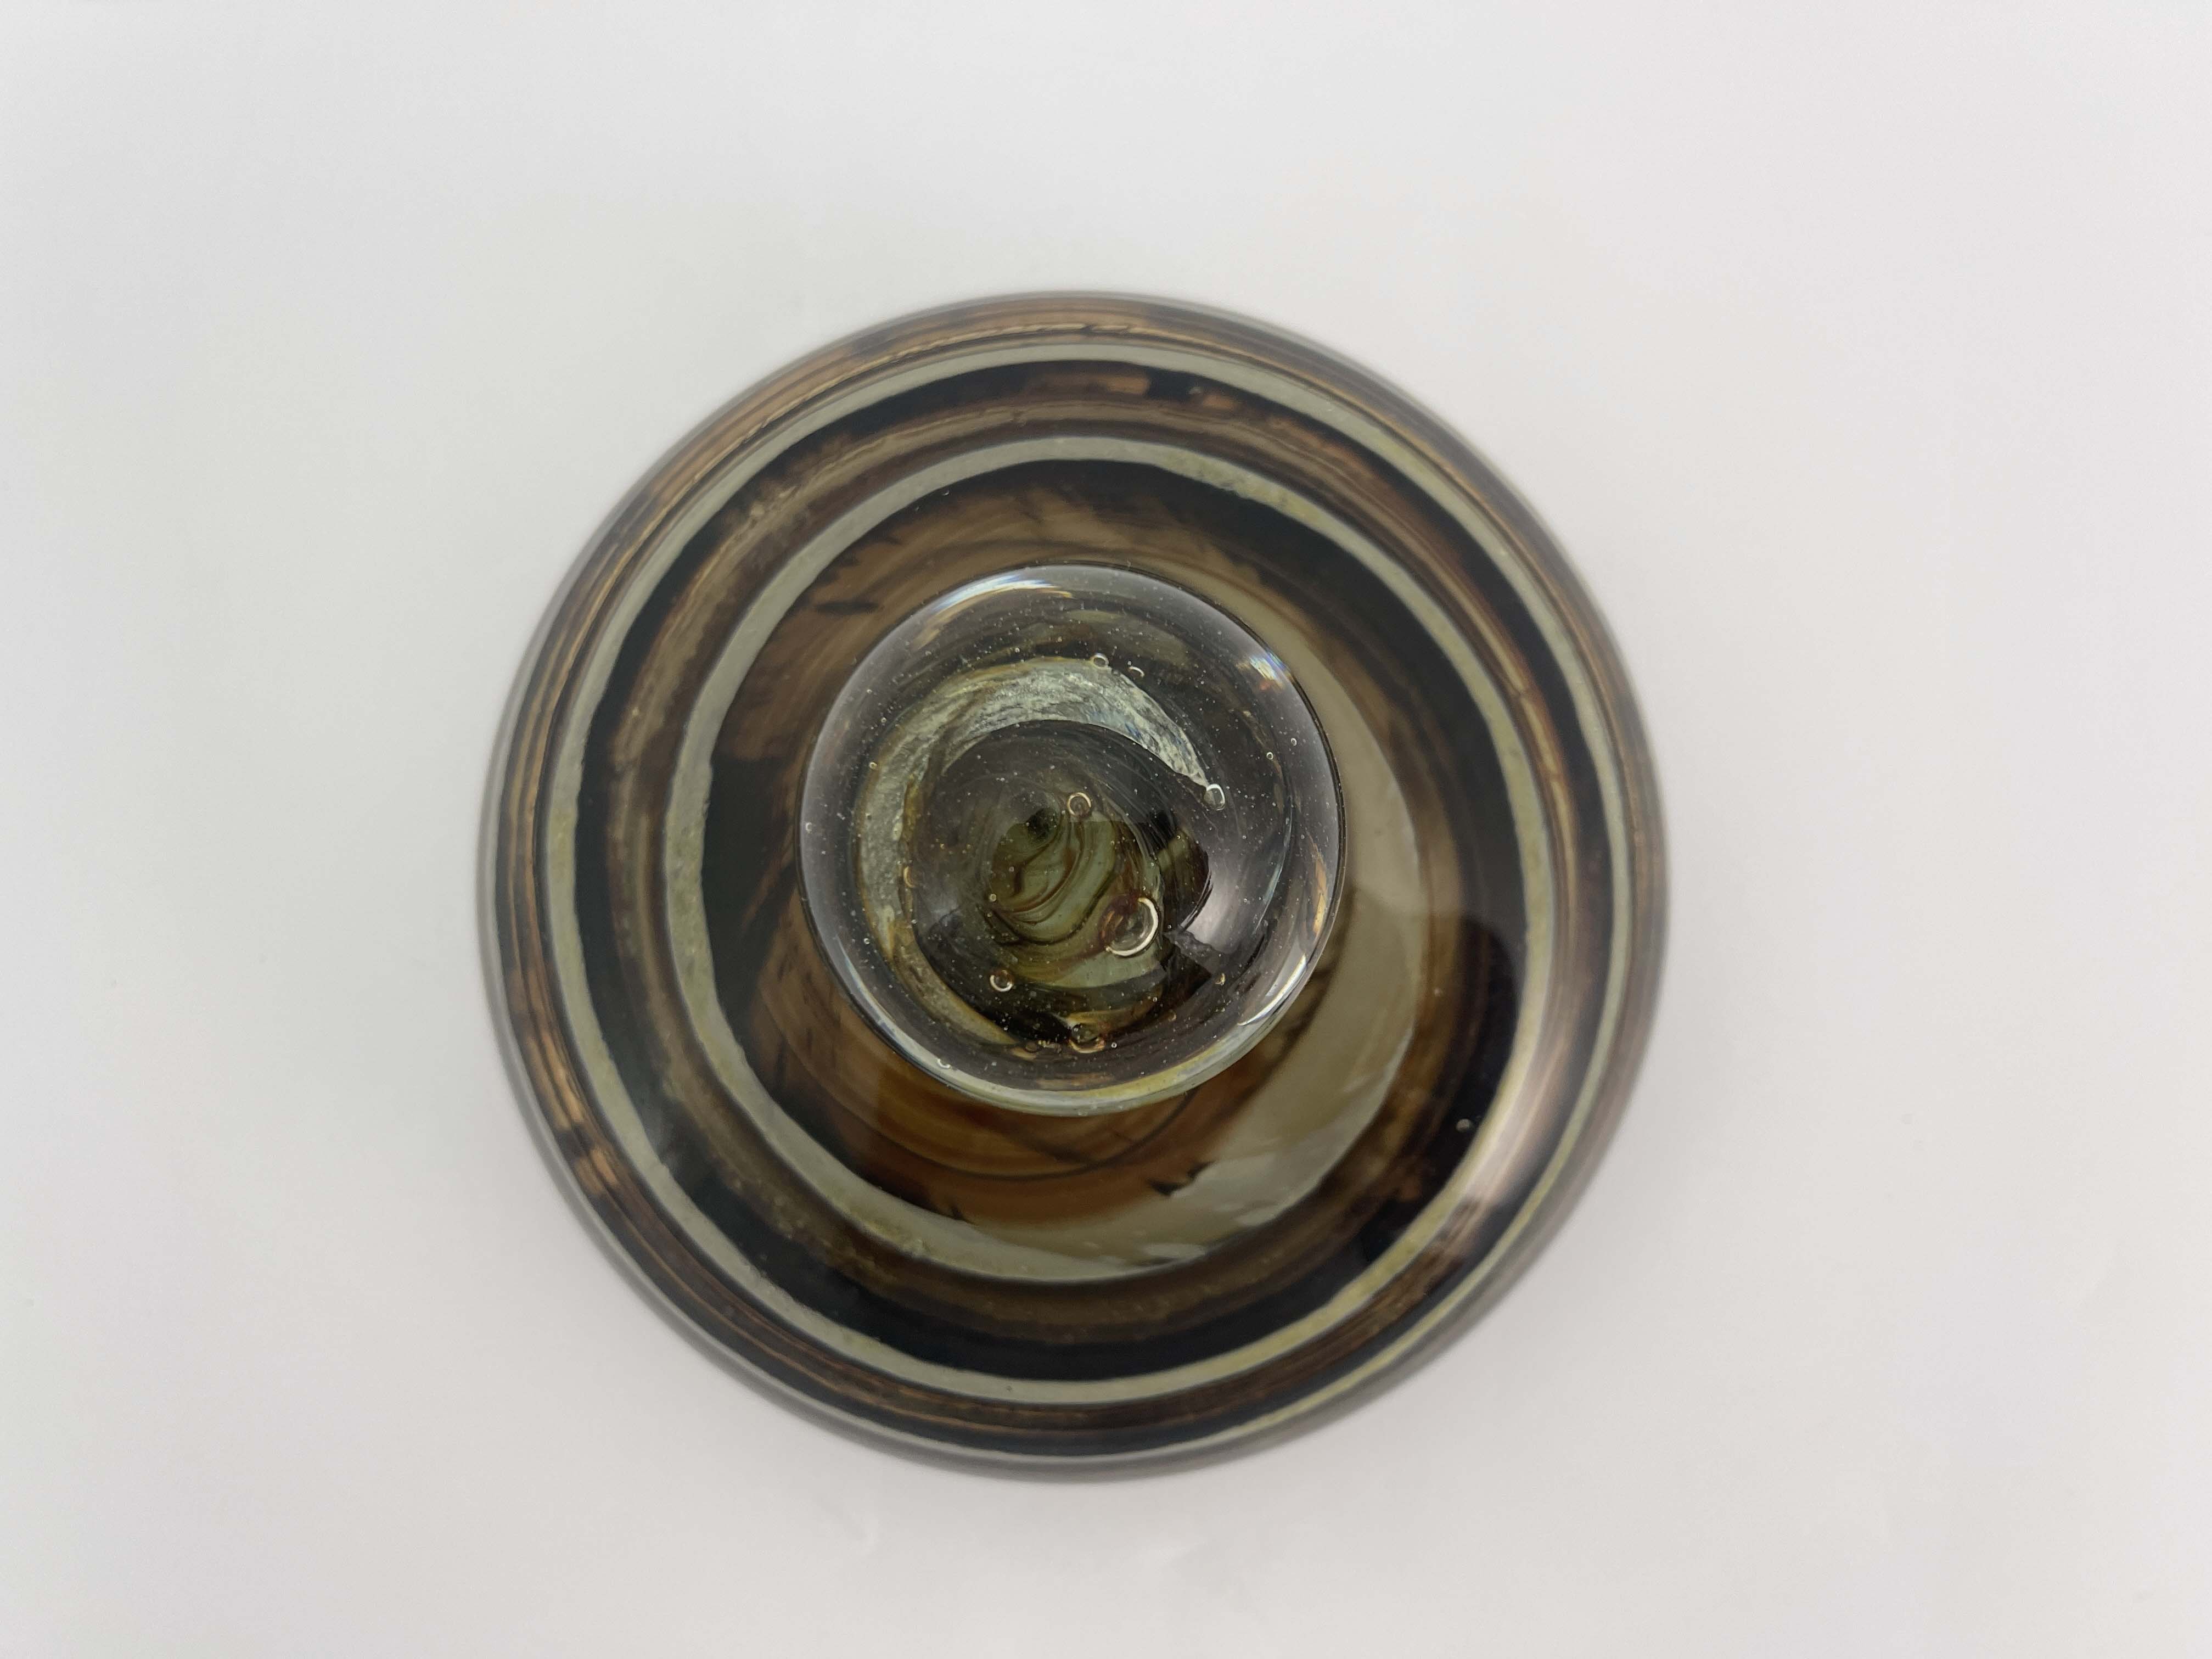 Michael Harris for Isle of Wight, a studio glass bottle and stopper - Image 5 of 8